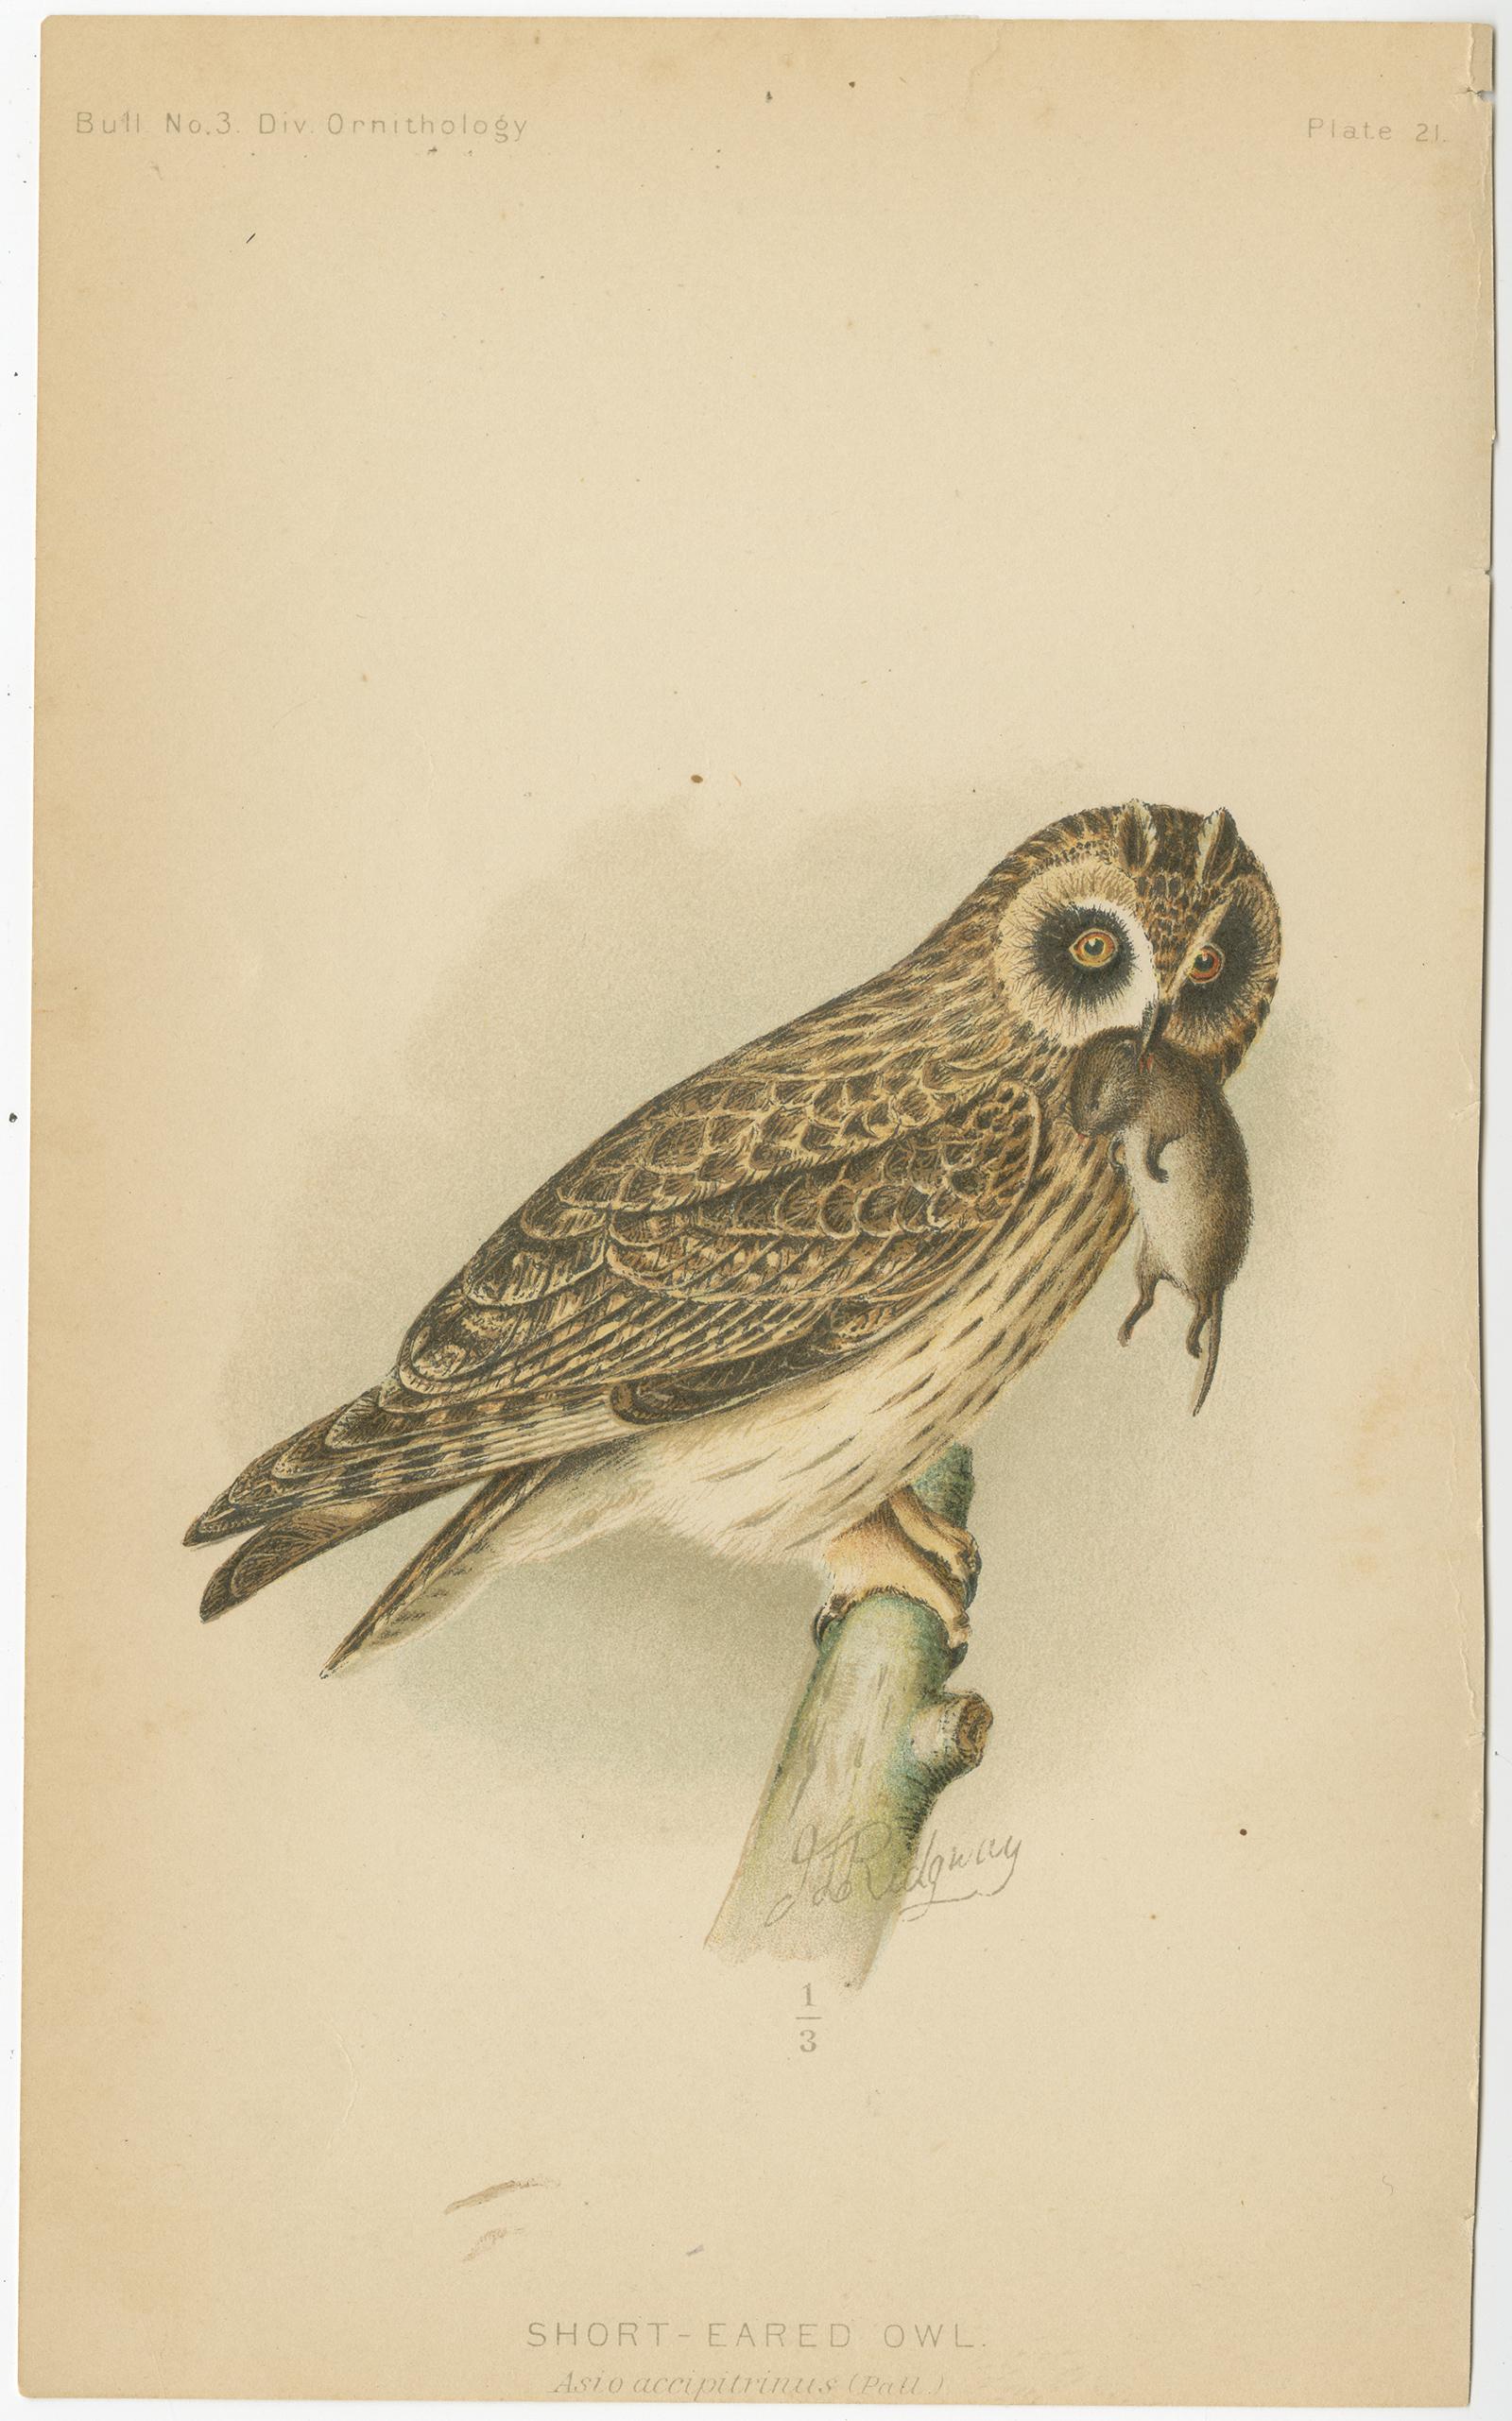 Set of three antique bird print titled 'Short-Eared Owl - Barn Owl - Barred Owl'. These prints originate from 'The Hawks and Owls of the United States' by C. Hart Merriam and A. K. Fisher. Illustrated by John L. Ridgway.